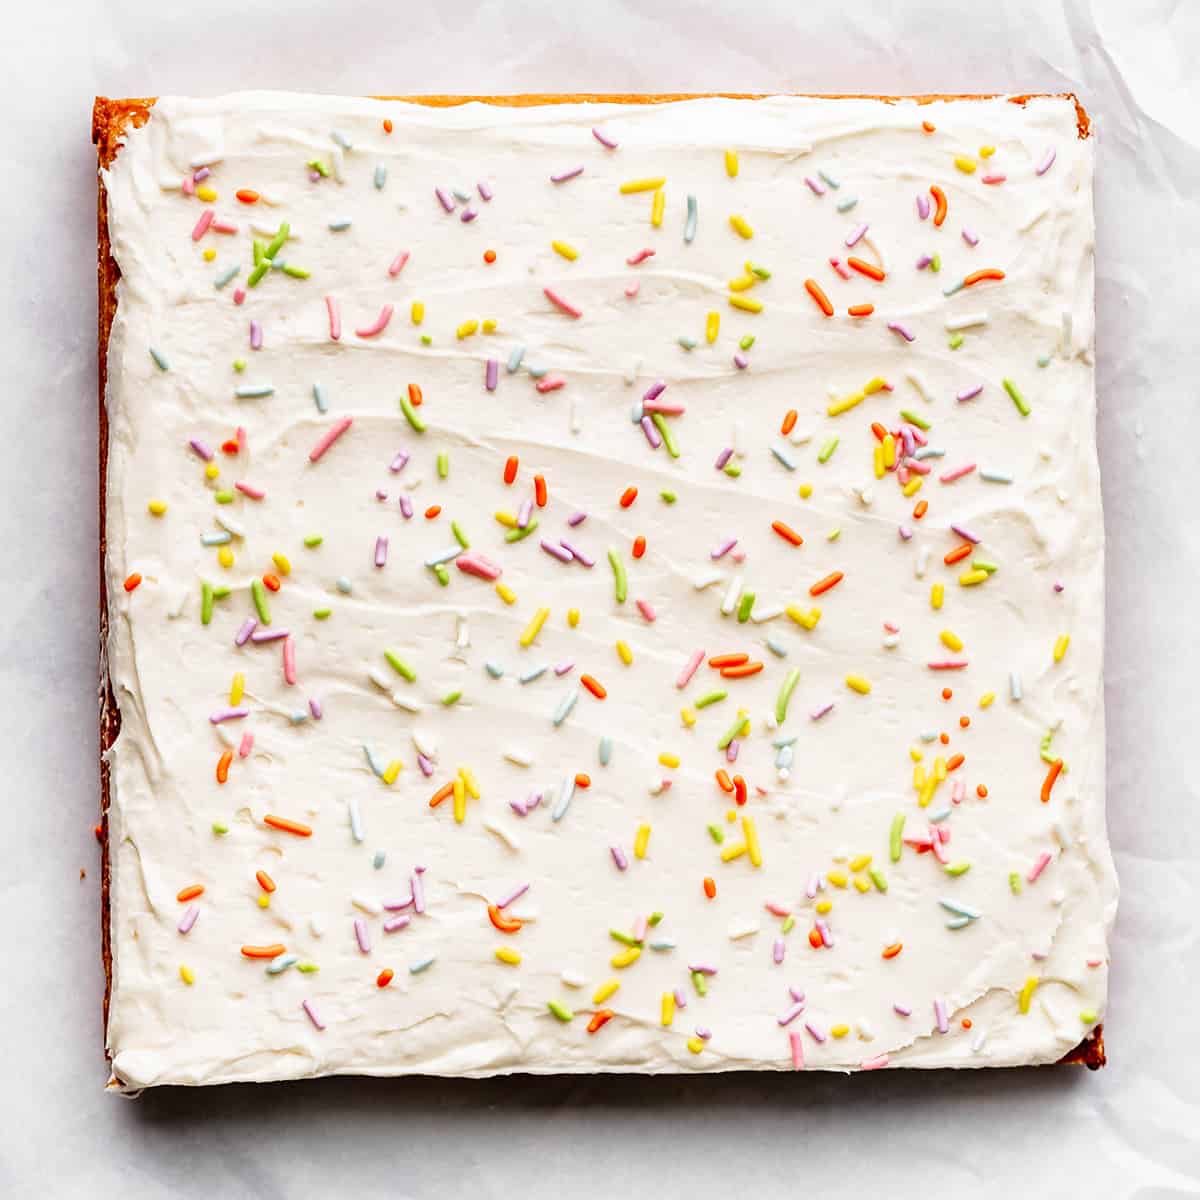 sugar cookie bars topped with sprinkles before being cut